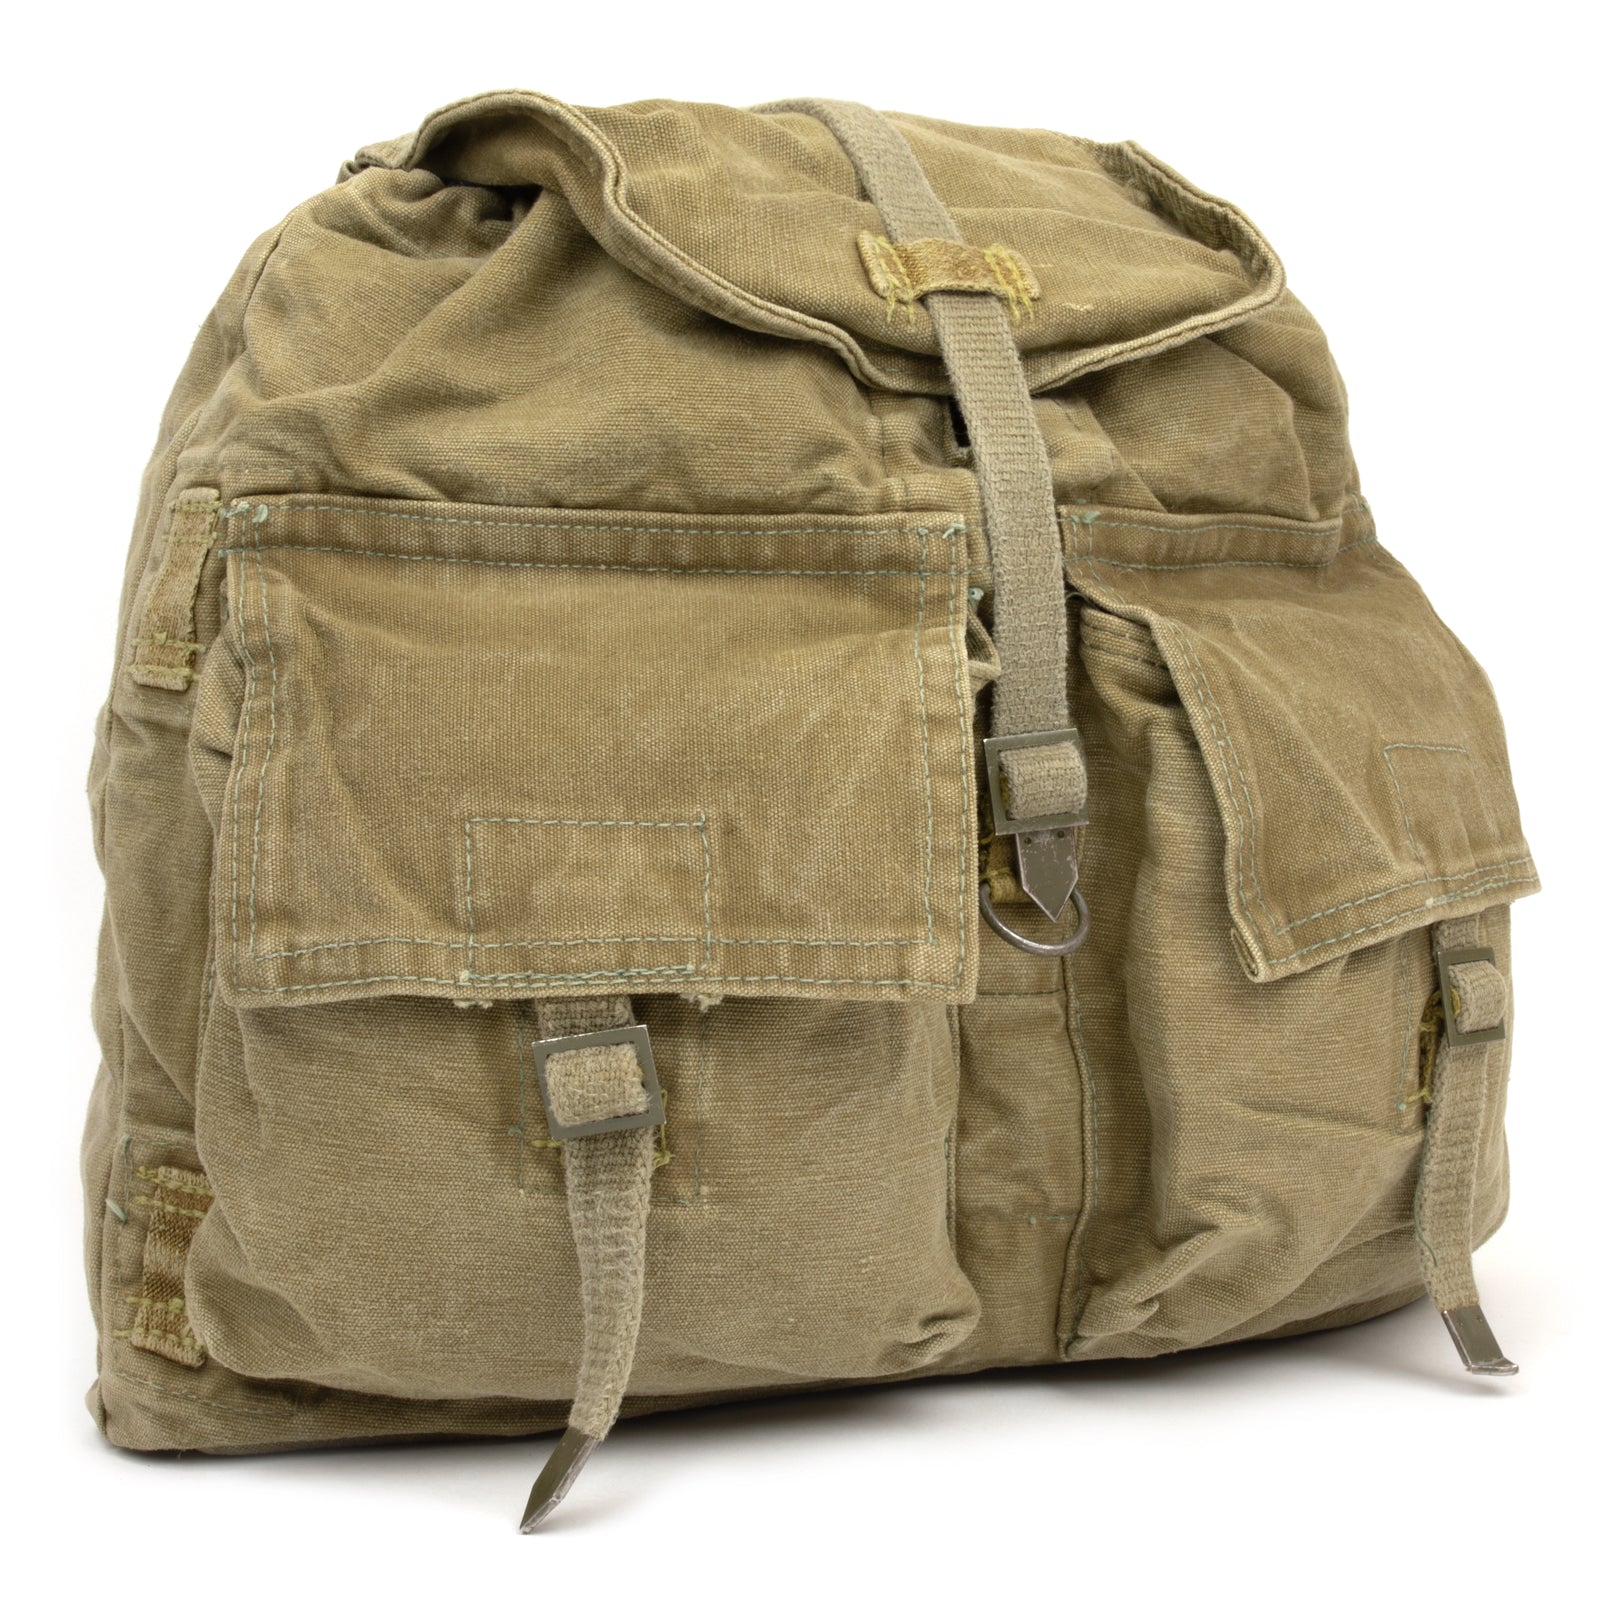 Arche SAC A DOS ARMEE TCHEQUE CZECH ARCHE BACKPACK 